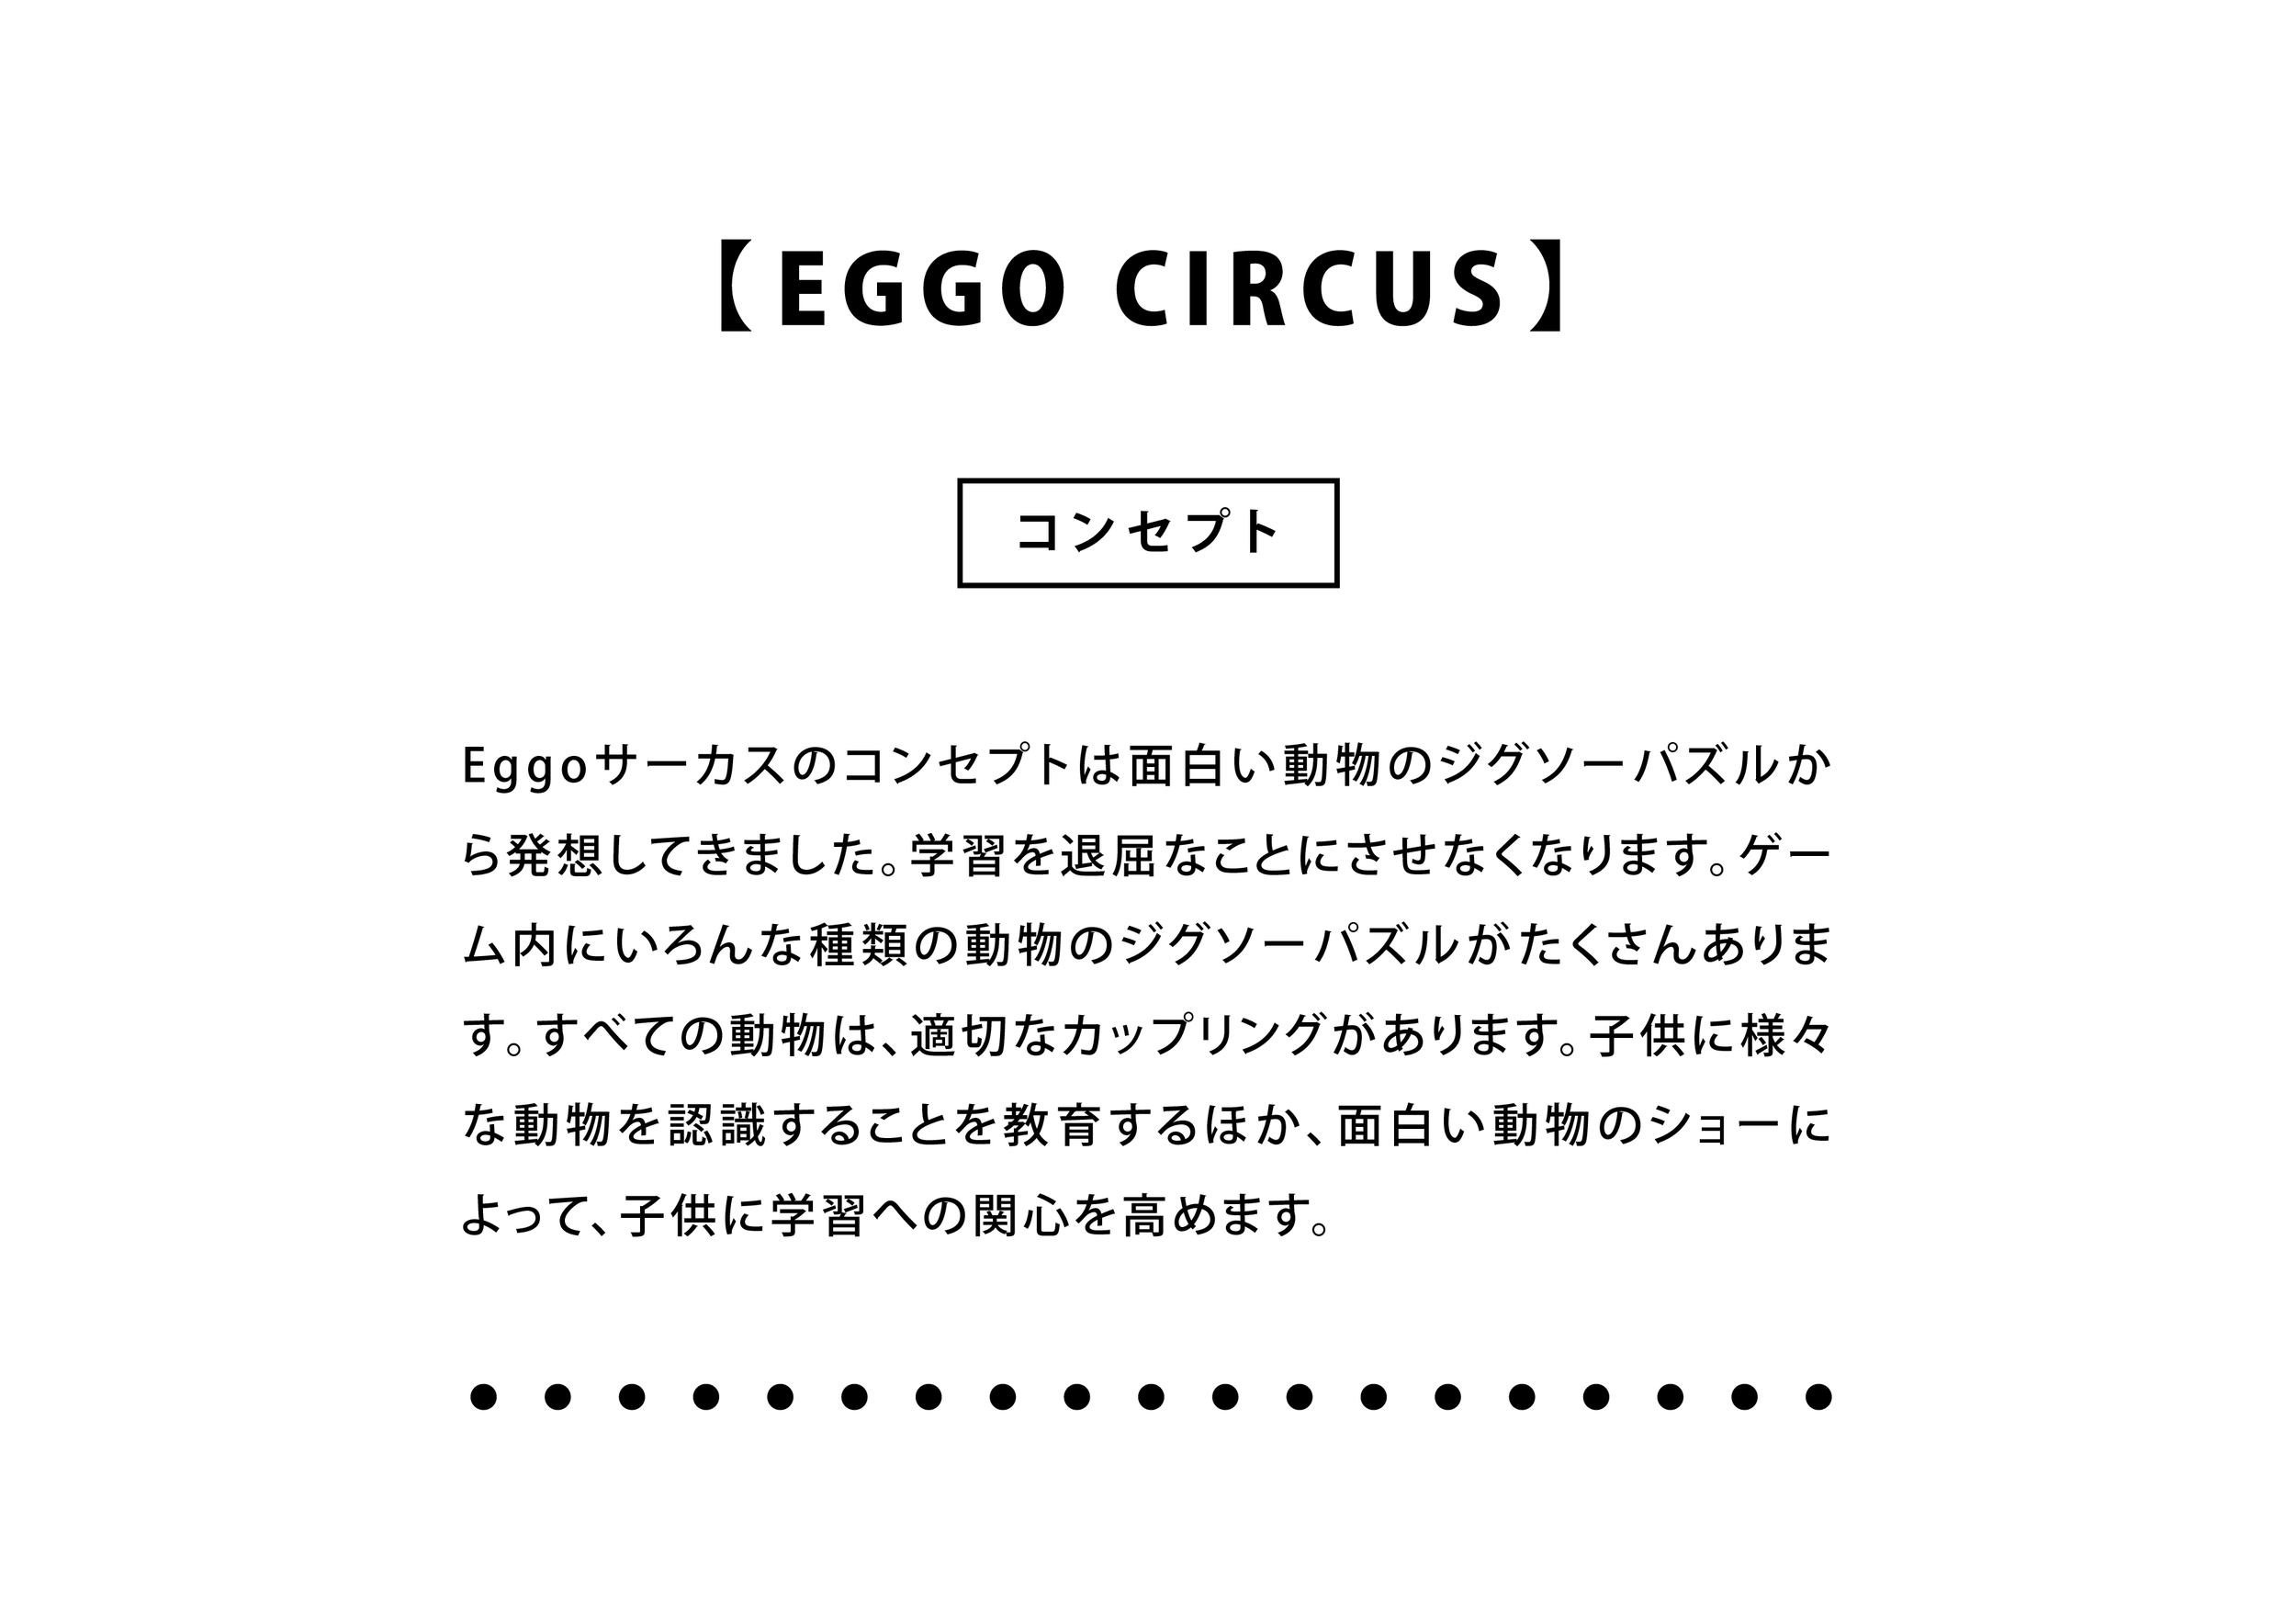 Promotion Kits_Circus-02.png